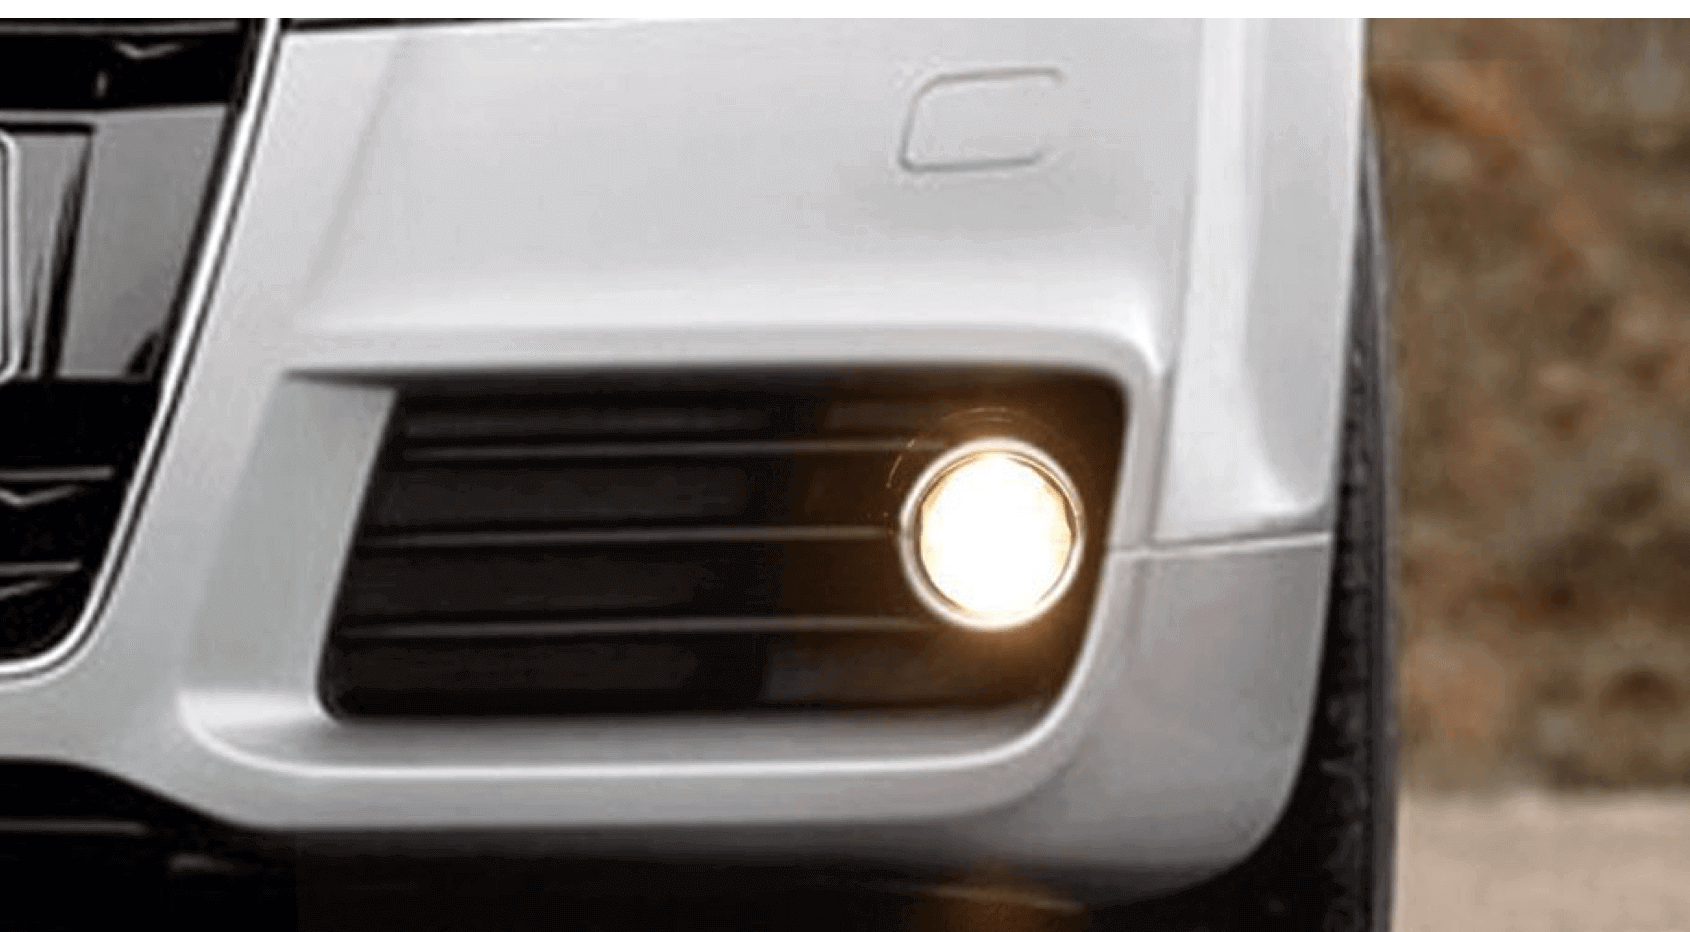 XenonPro - What are fog lights?